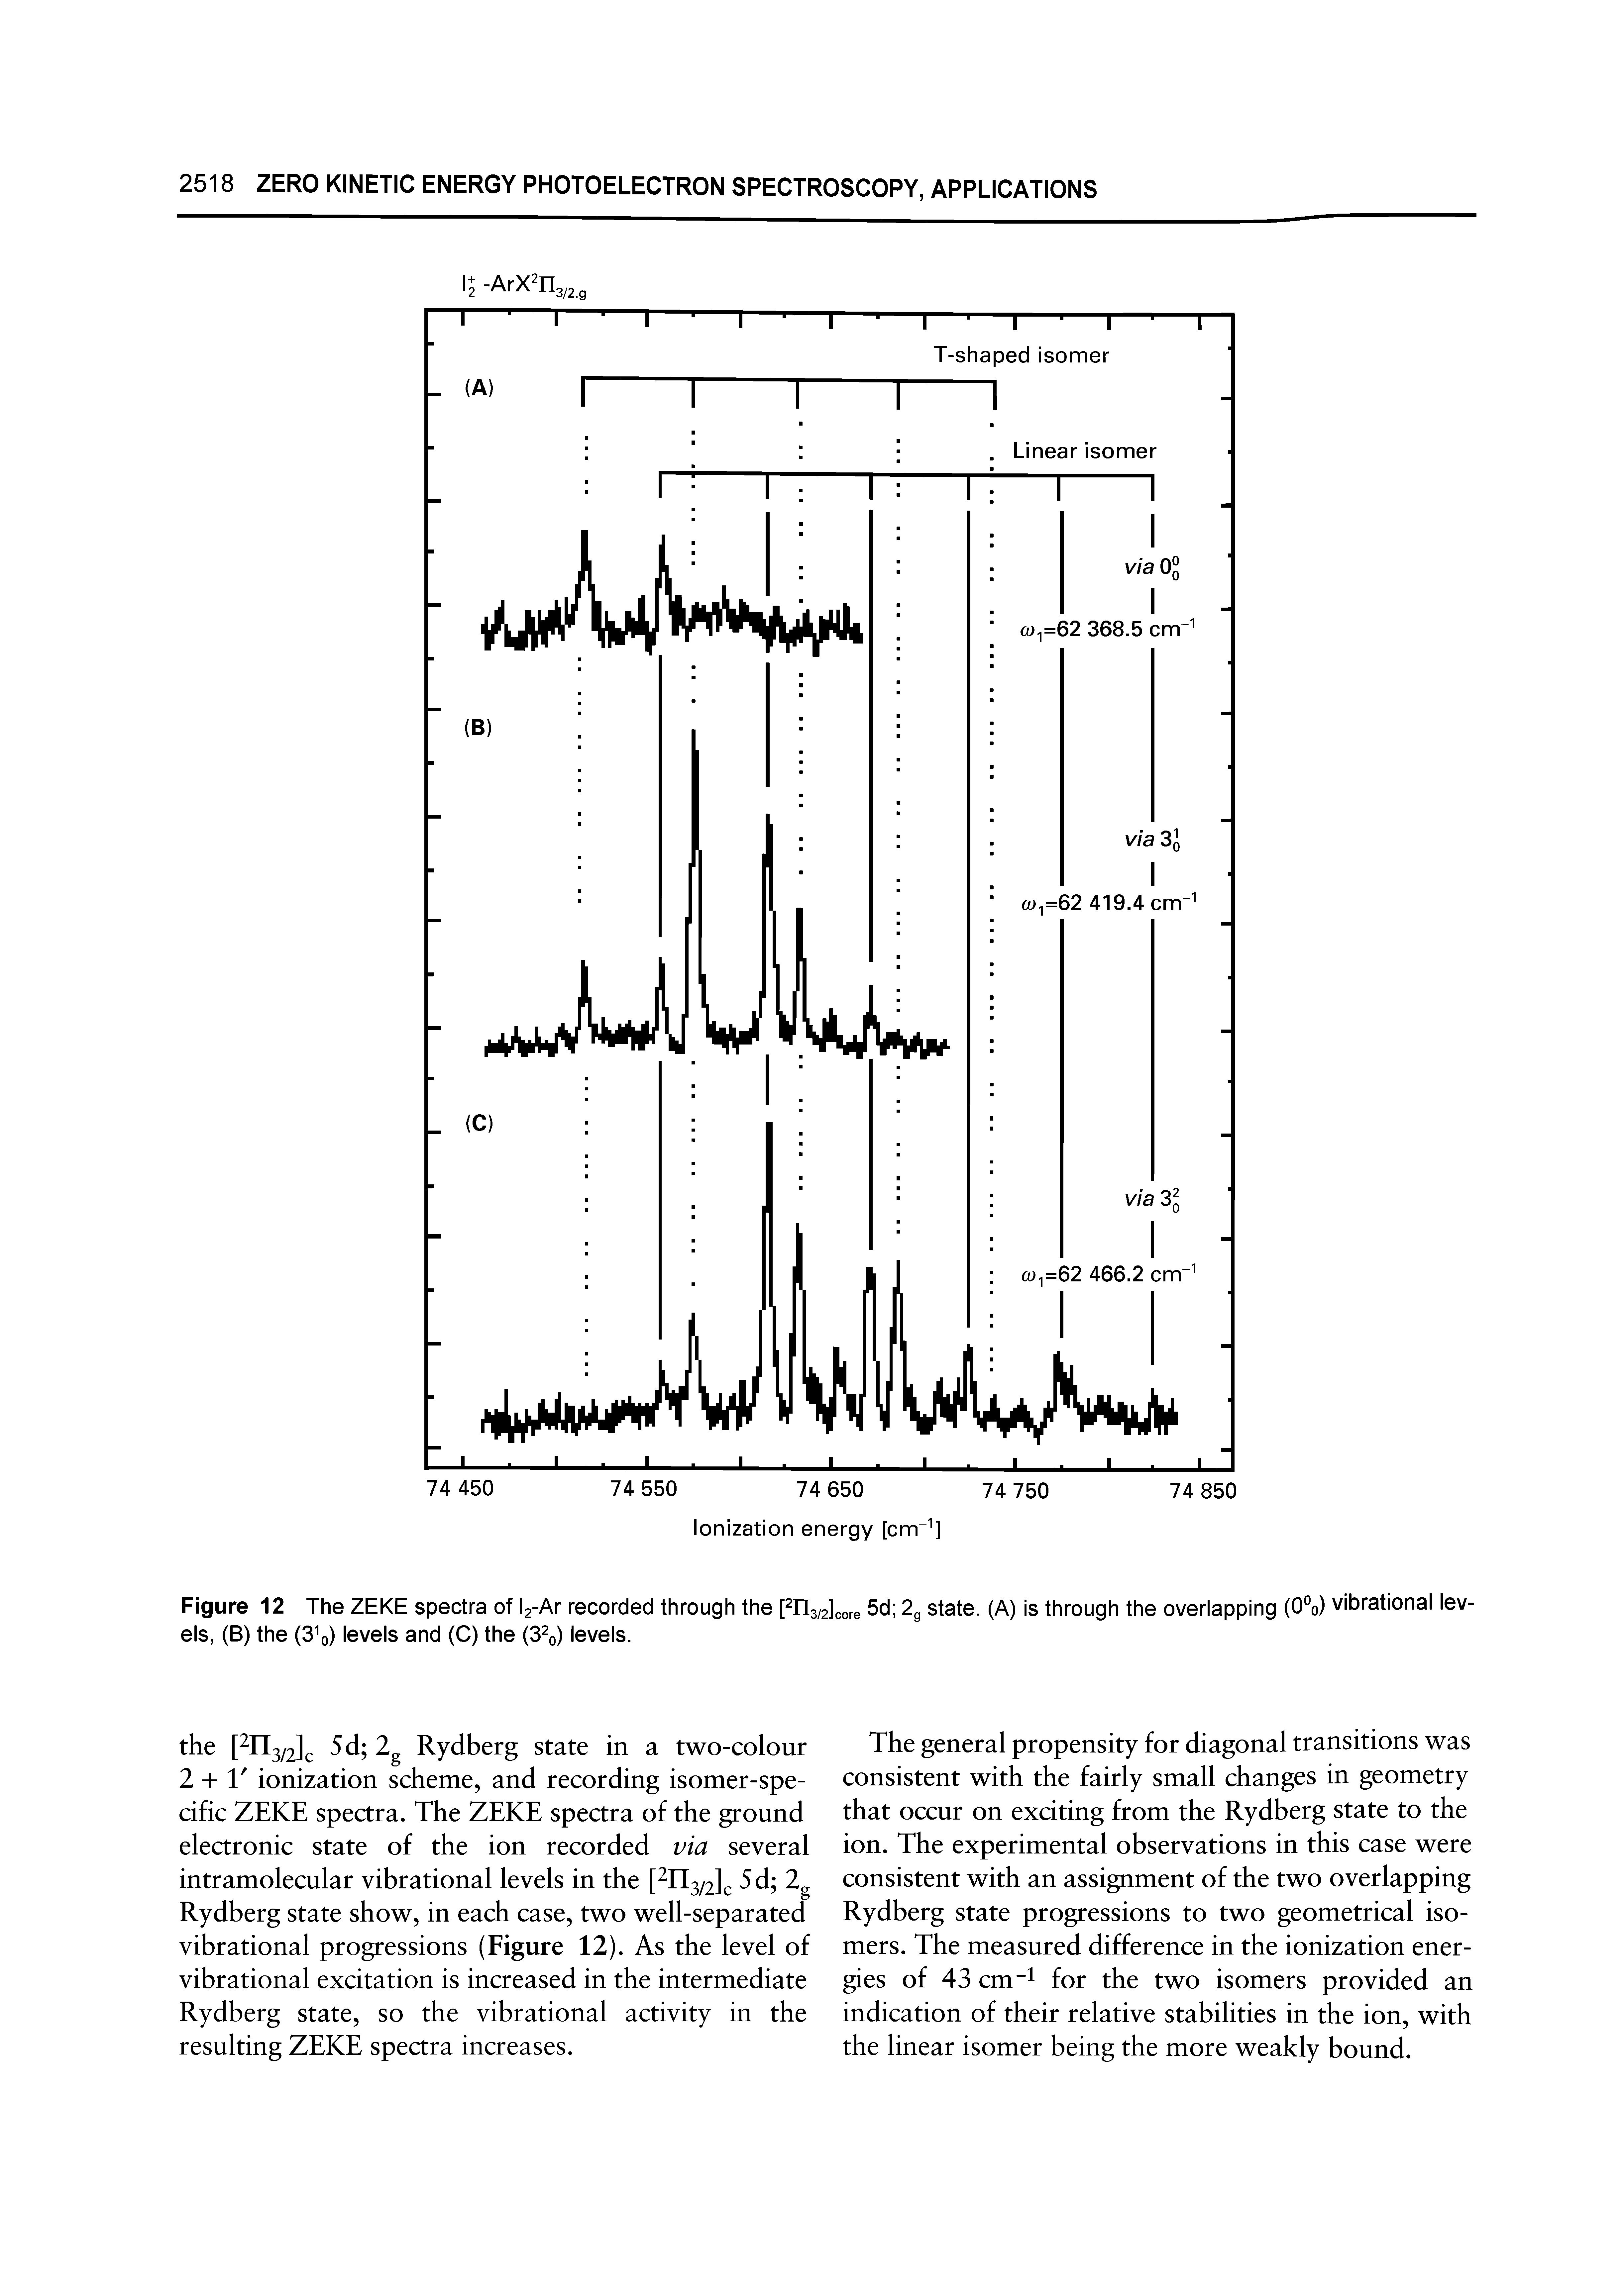 Figure 12 The ZEKE spectra of l2-Ar recorded through the pn3/2]core 5d 2g state. (A) is through the overlapping (0%) vibrational levels, (B) the (3 o) levels and (C) the (S o) levels.